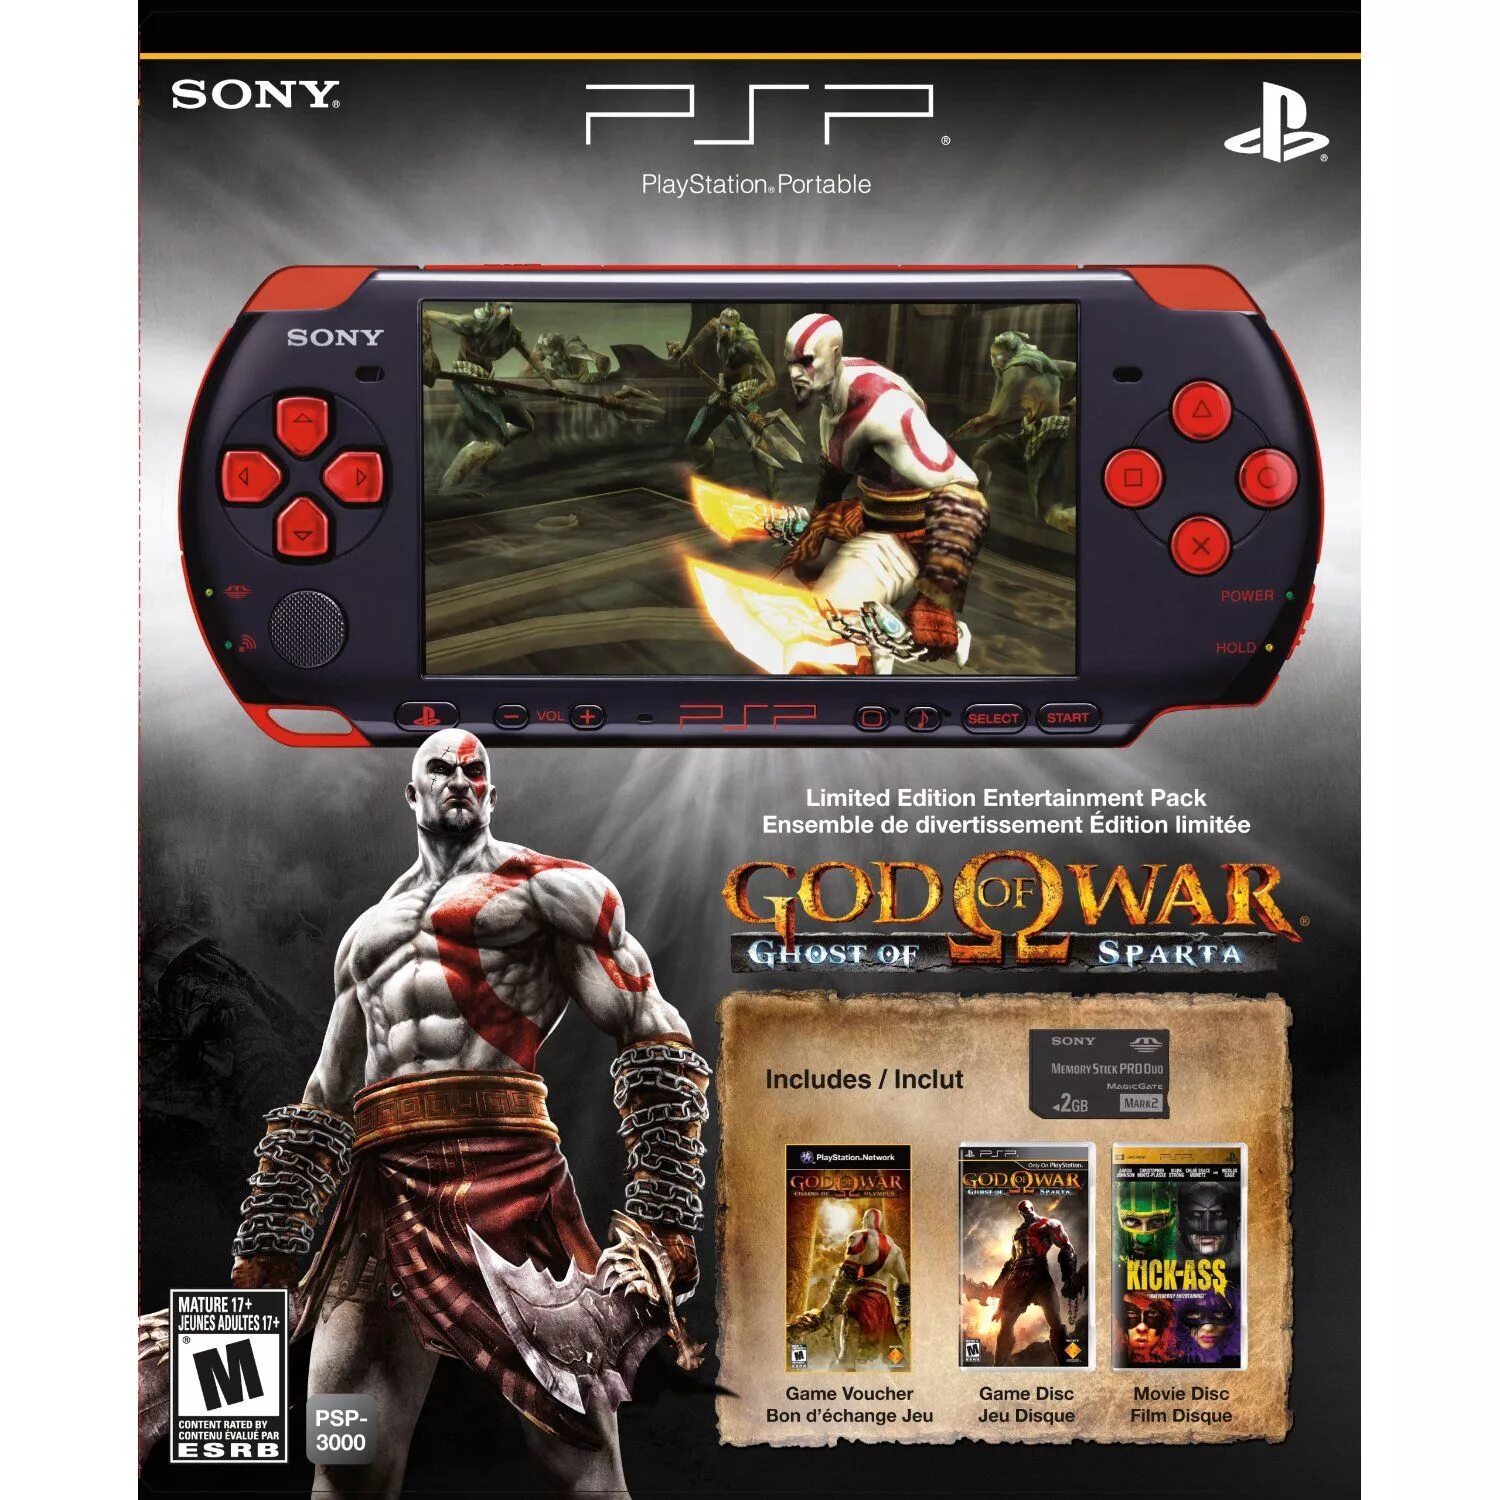 Игры на psp sony. Sony PLAYSTATION Portable 3000 Limited Edition.